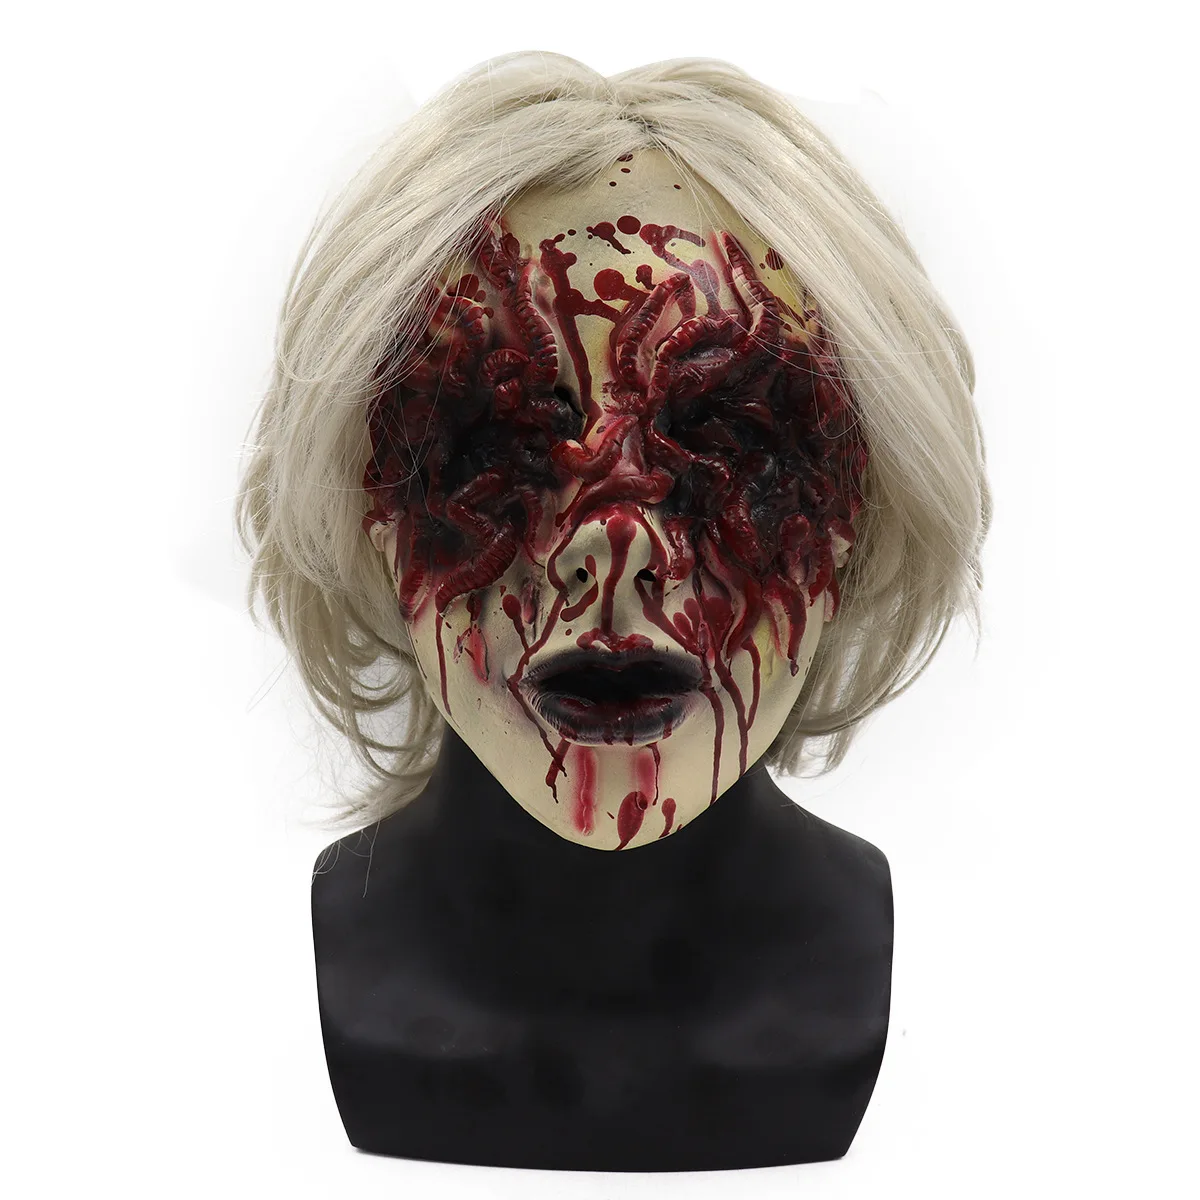 

Halloween Horror Realistic Monster Mask Bloody Zombie Mask With wig Party Cosplay Disgusting Rot Face Scary Masquerade Masker